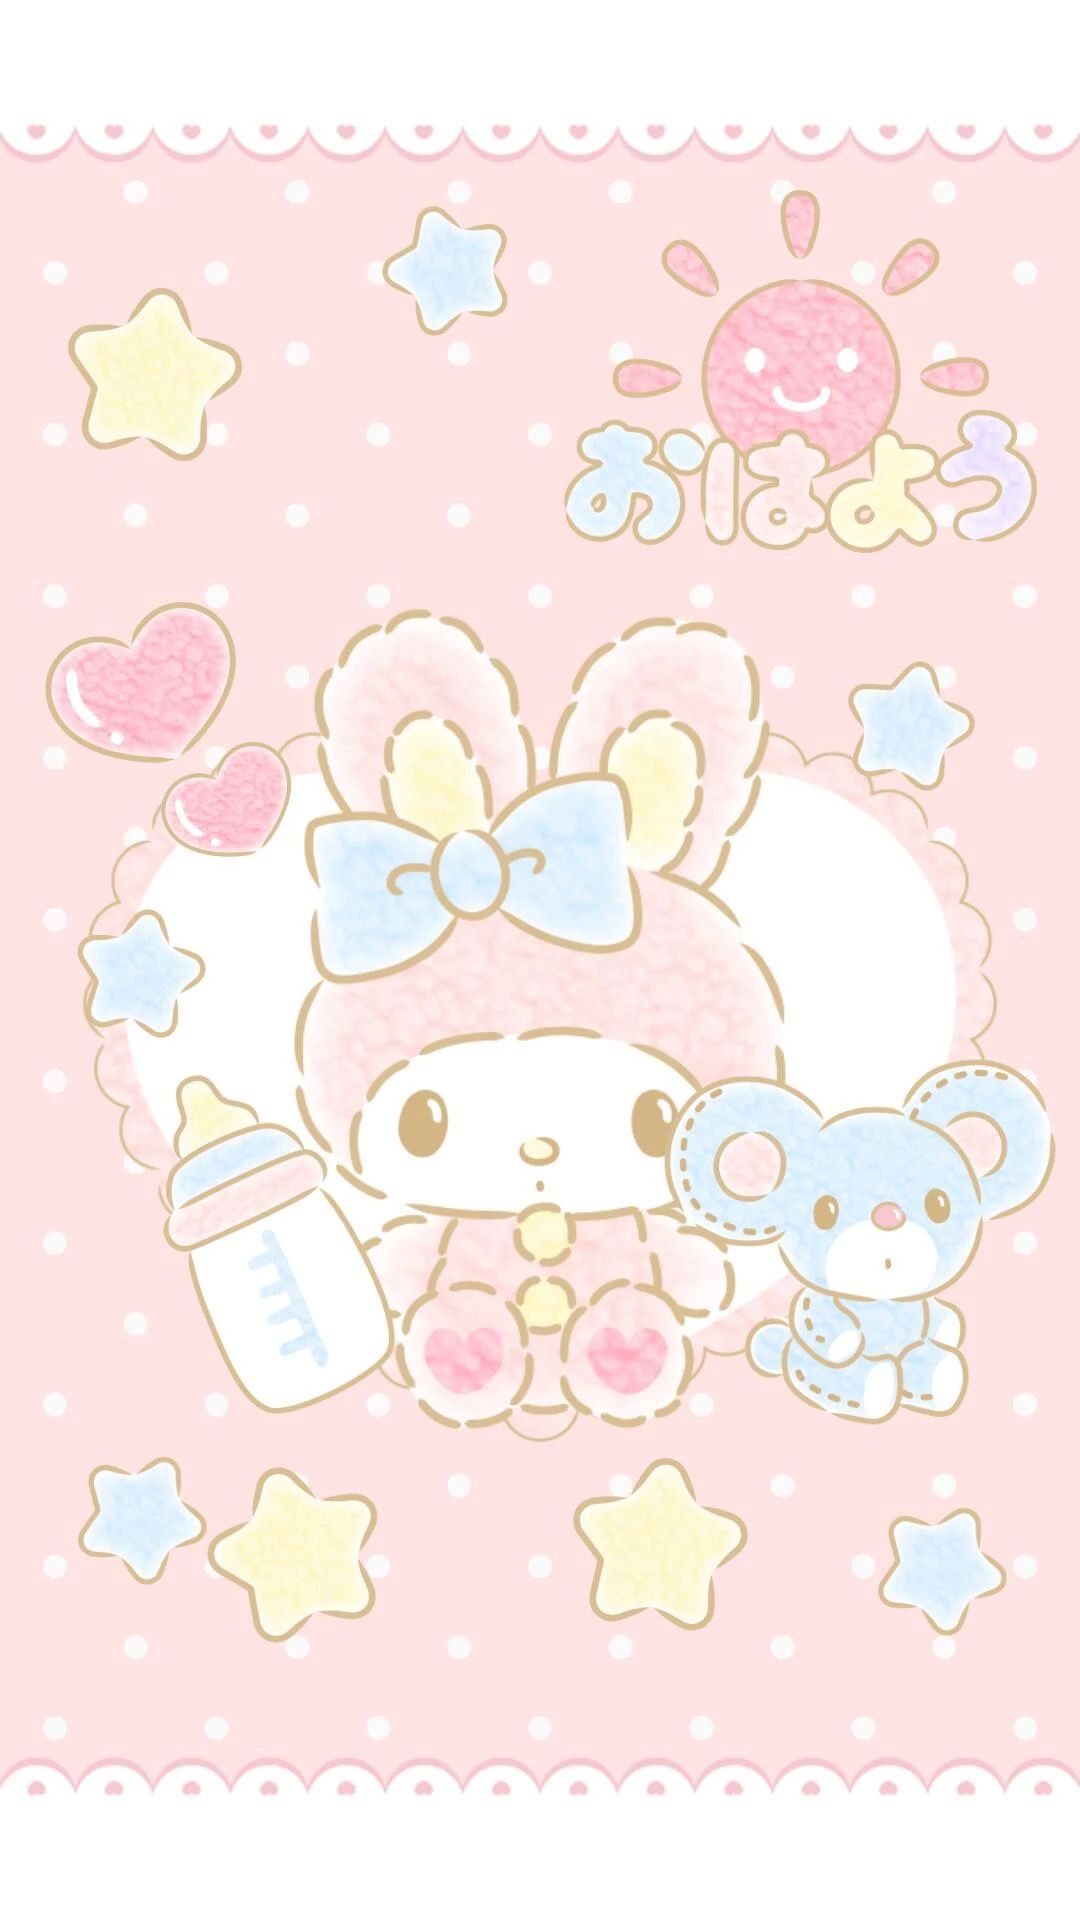  Be Positive   KUROMI AND MY MELODY WALLPAPERS